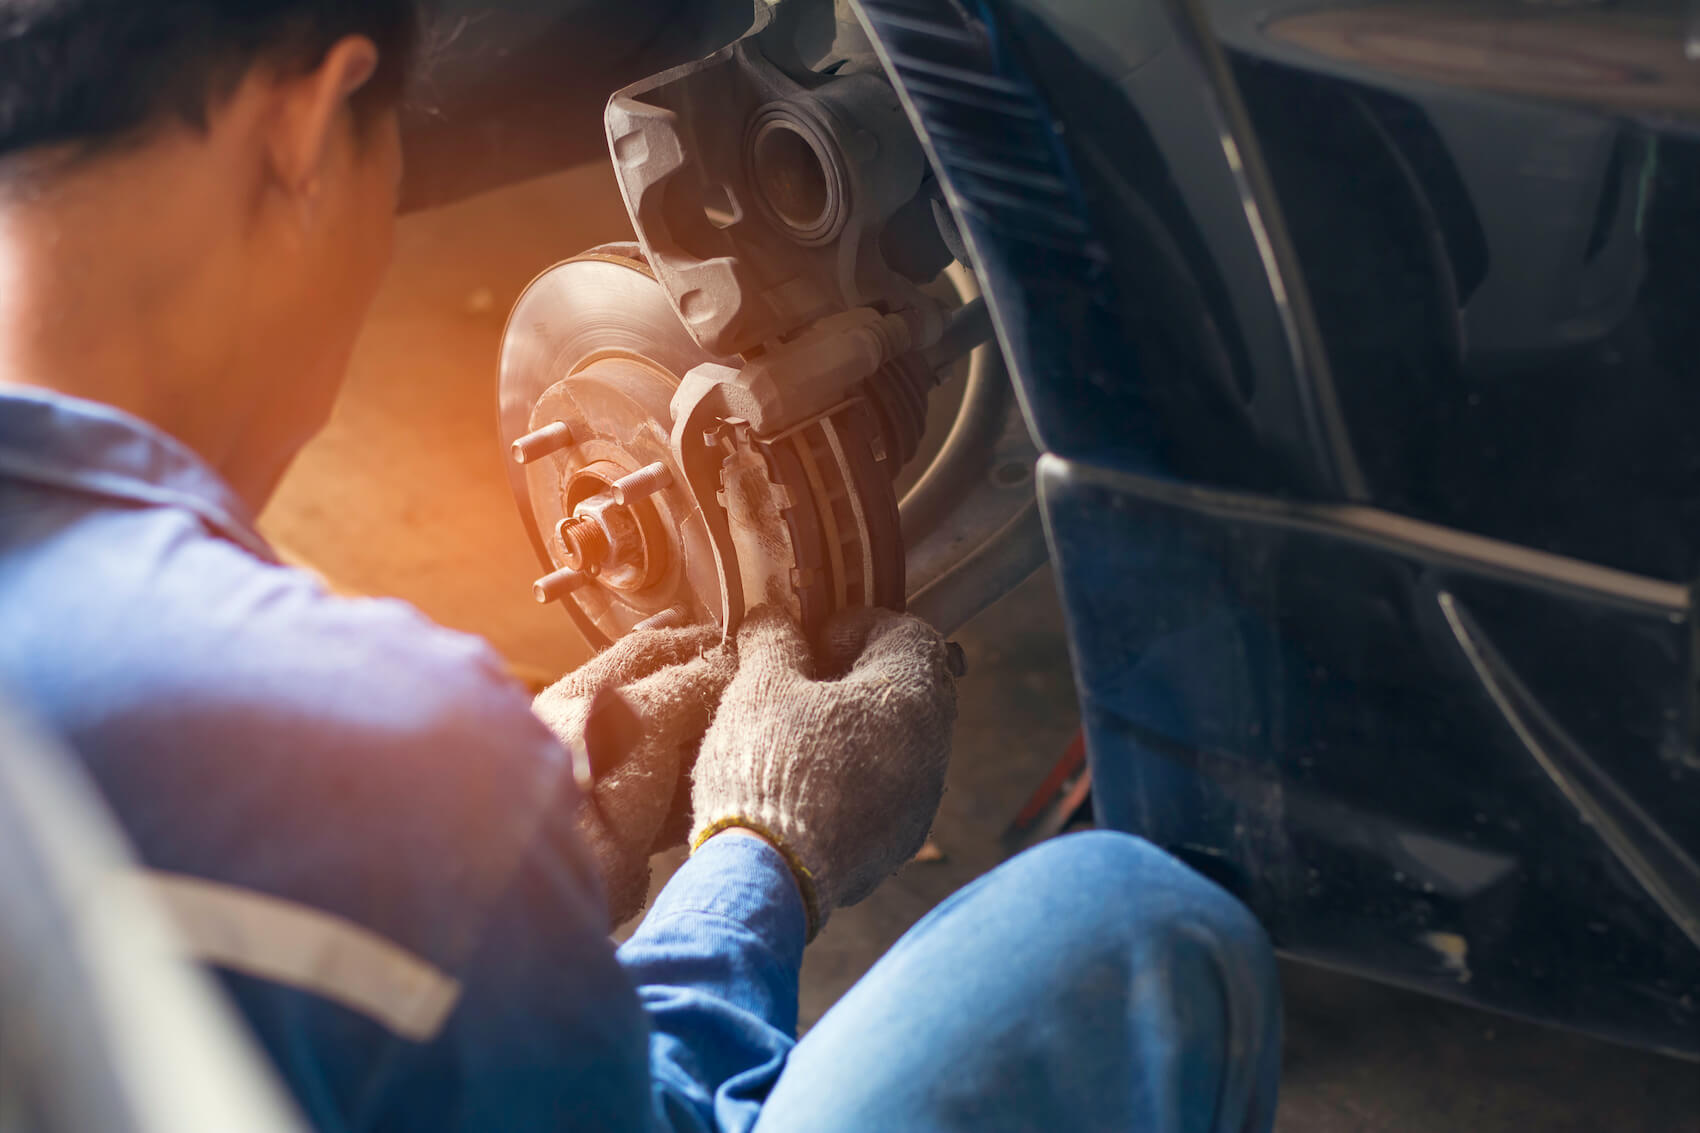 Technician Performing a Brake Inspection